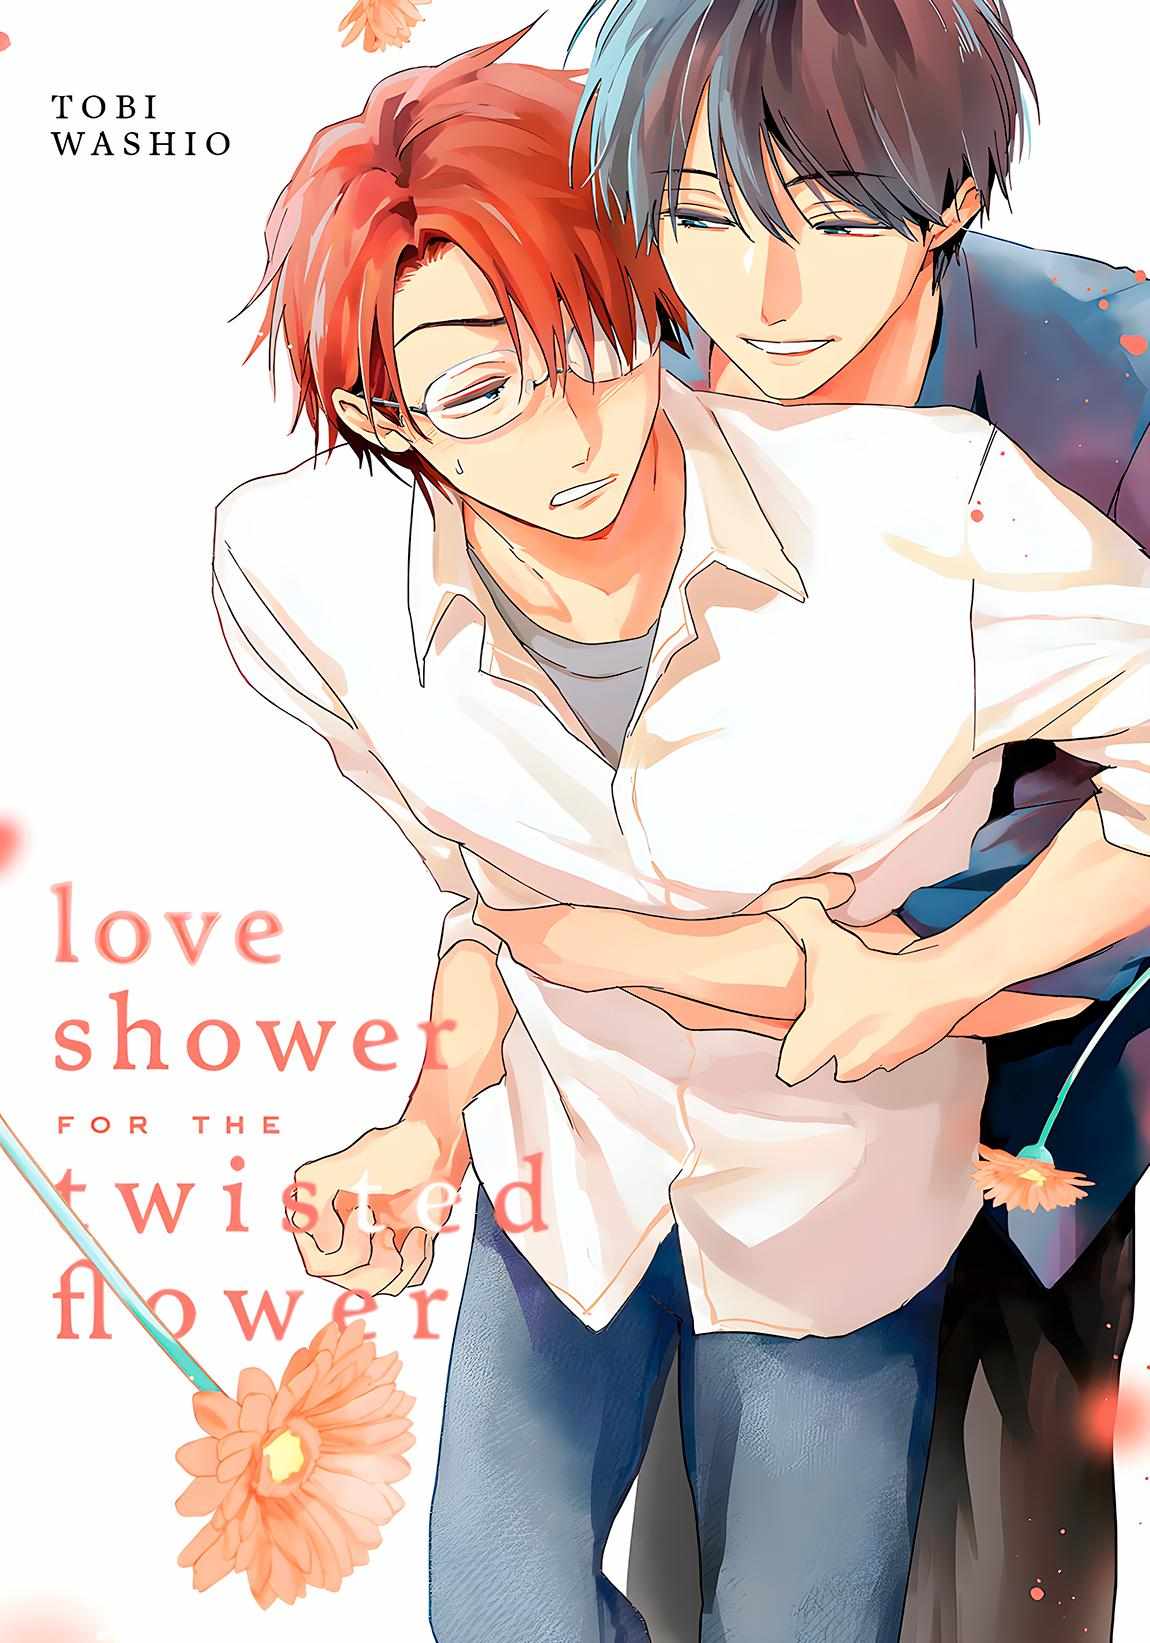 Love-Shower For The Twisted Flower - Page 3